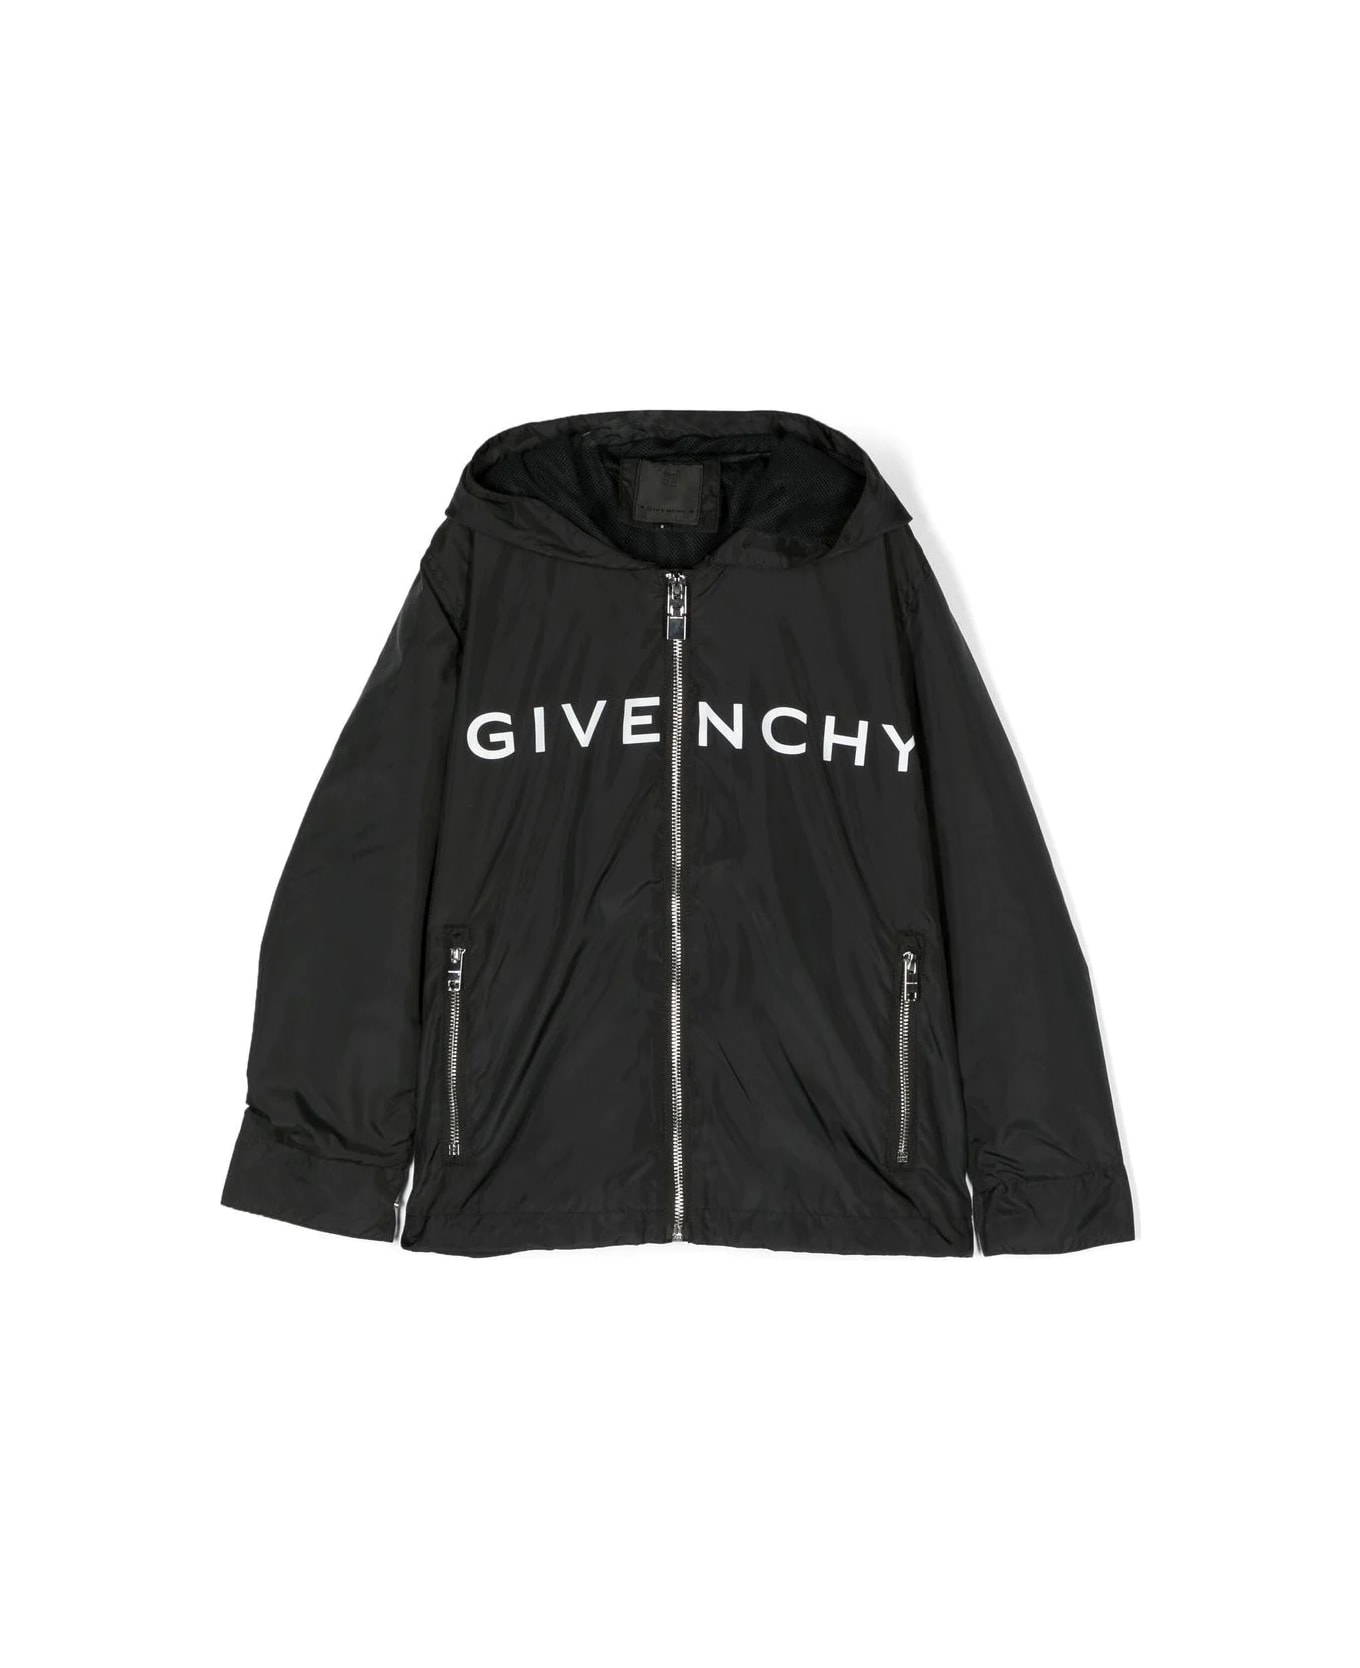 Givenchy Jacket With Print - Black